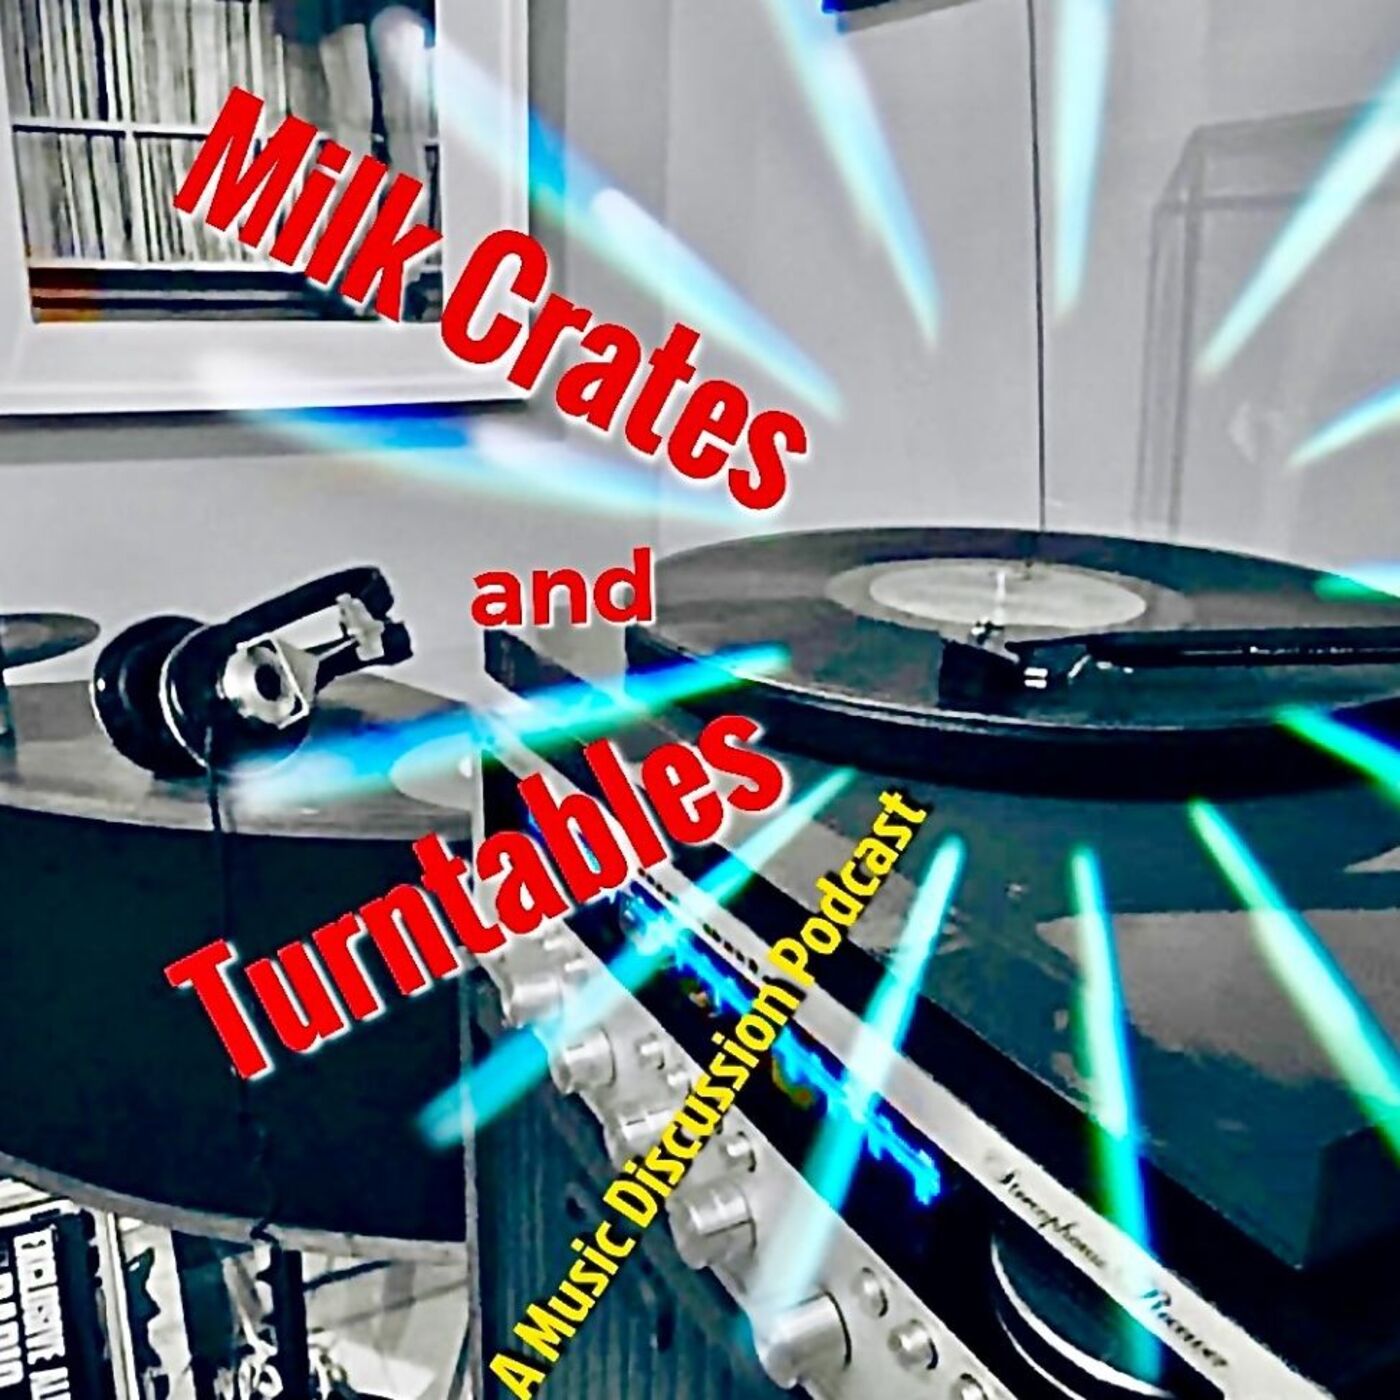 Fresh update on "1949" discussed on Milk Crates and Turntables. A Music Discussion Podcast